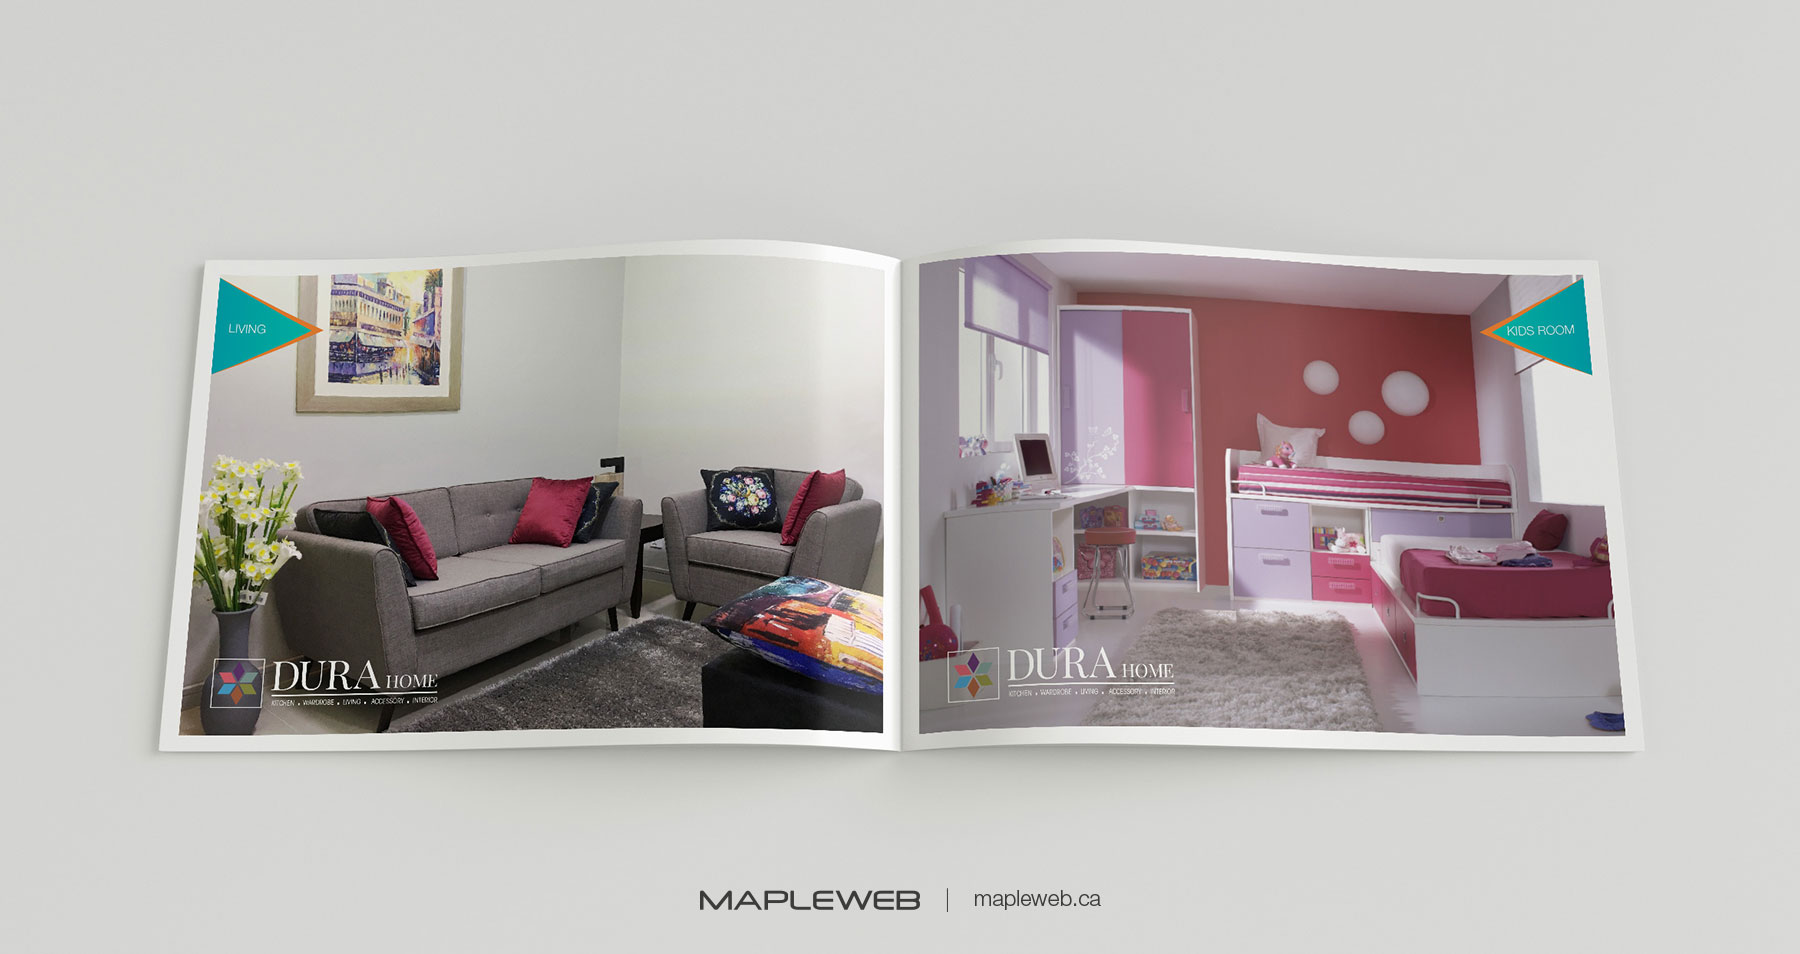 Dura Home Brand design by Mapleweb Open Photo Album Displaying Baby room and Living Room design